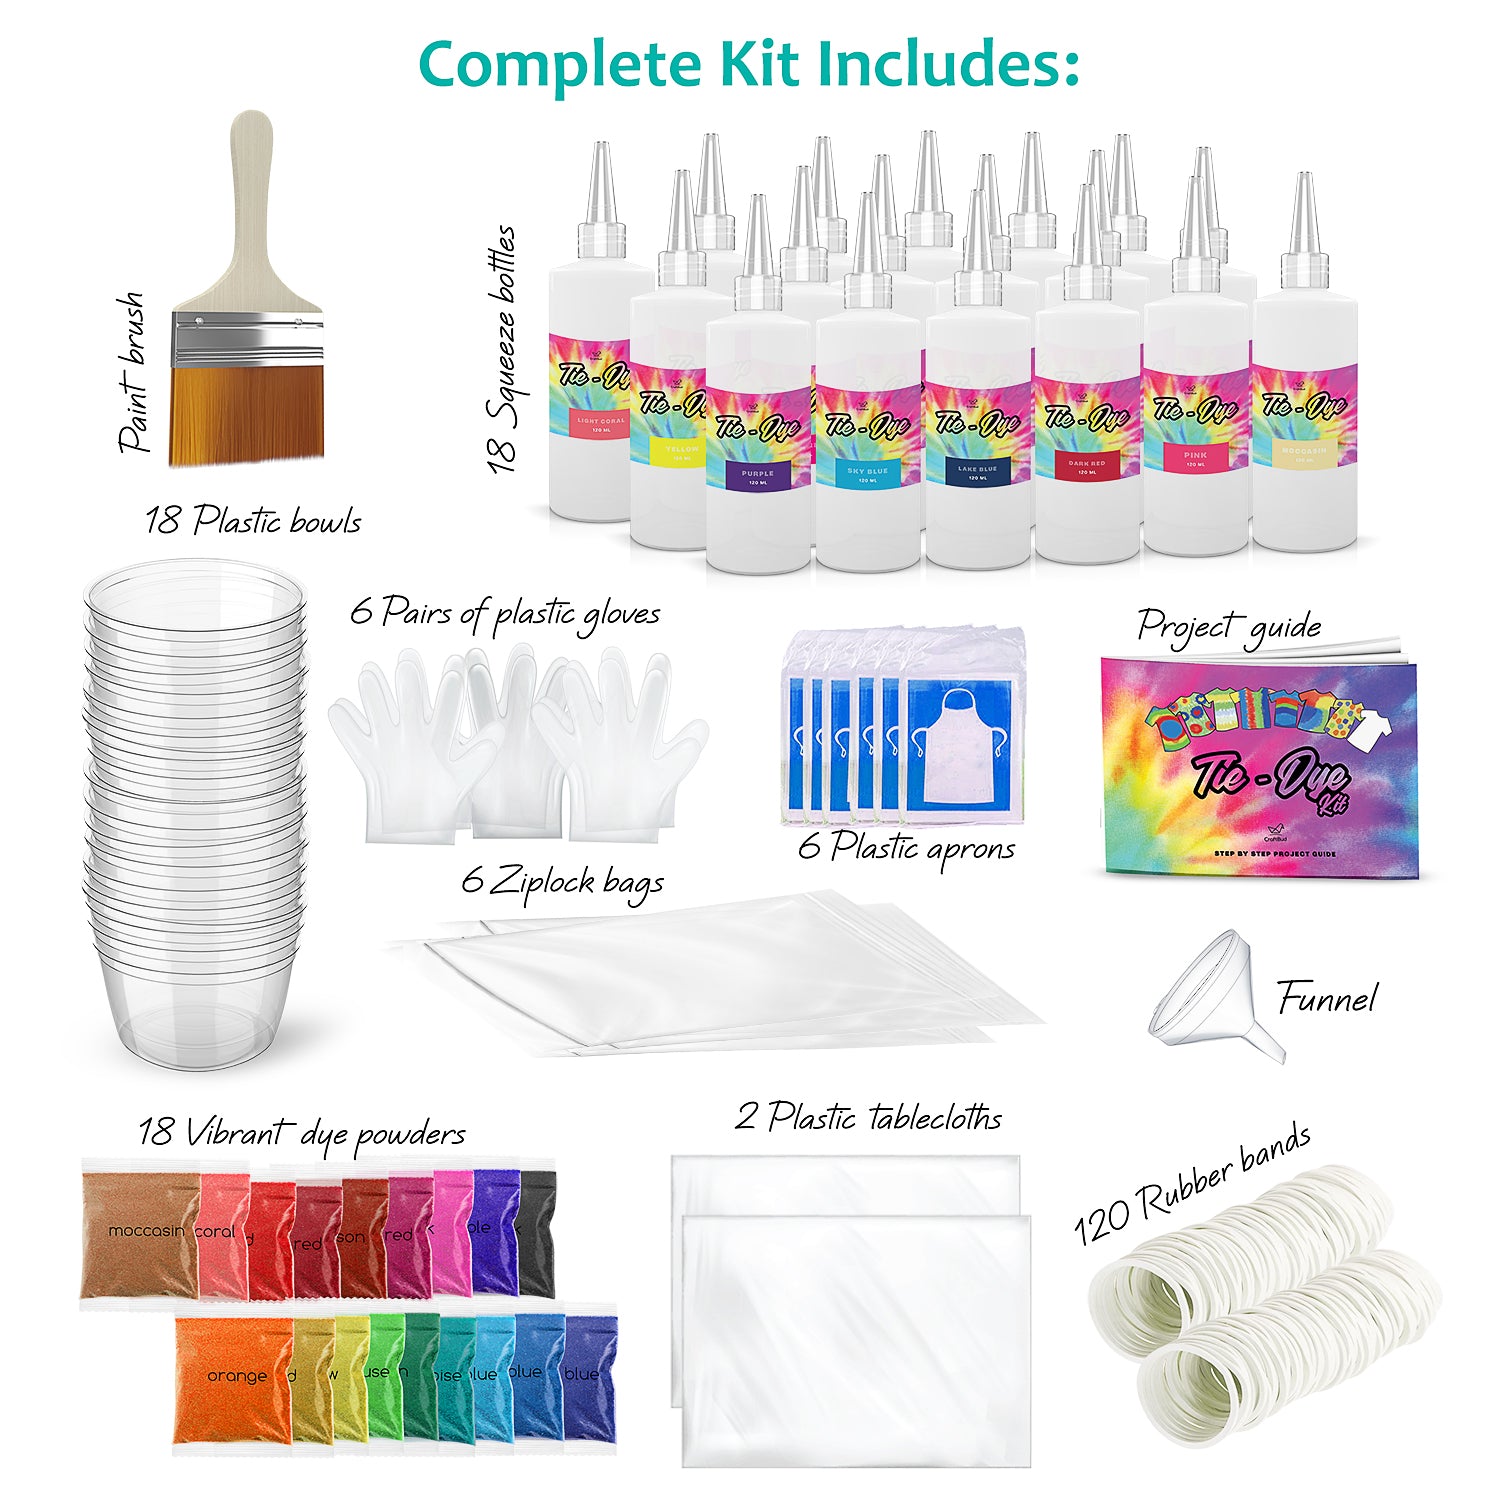 Meland Tie Dye Kit with 3 White T-Shirts, 18 Colors DIY Fabric Tye Dye for Clothes, Arts and Craft for Kids Girls Age 8-12 Year Old, Birthday